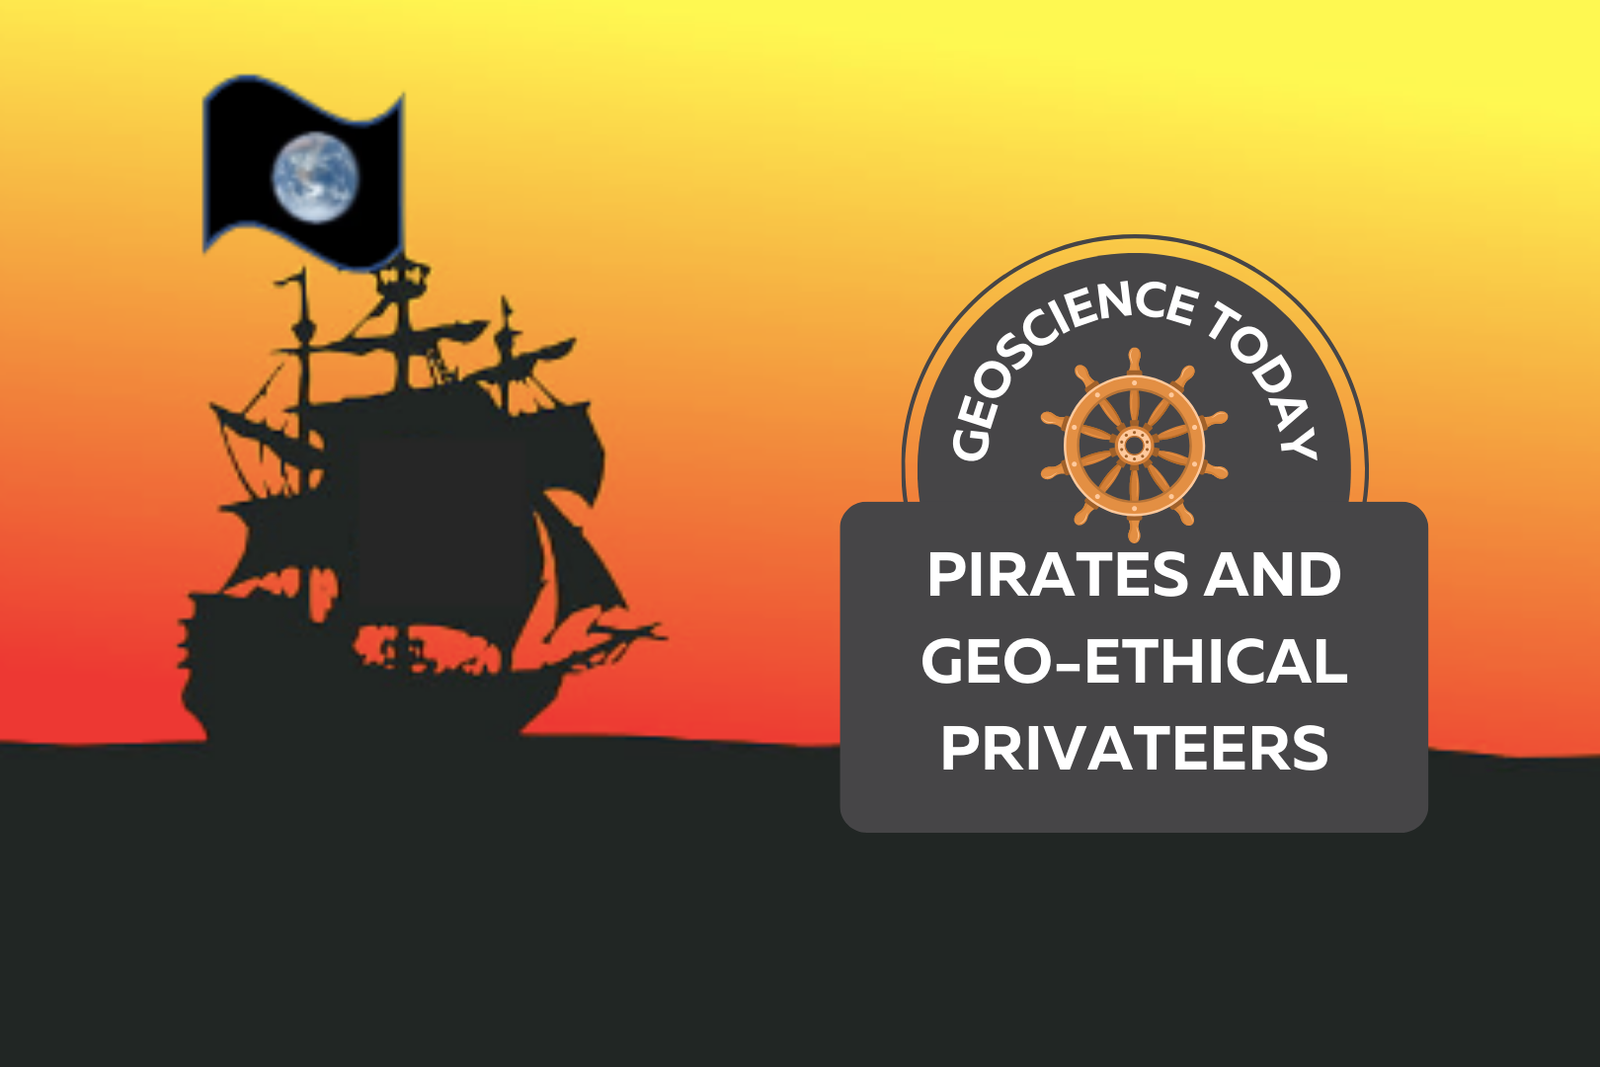 Rule 5 of the Pirate Code, Rules of the Pirate Code